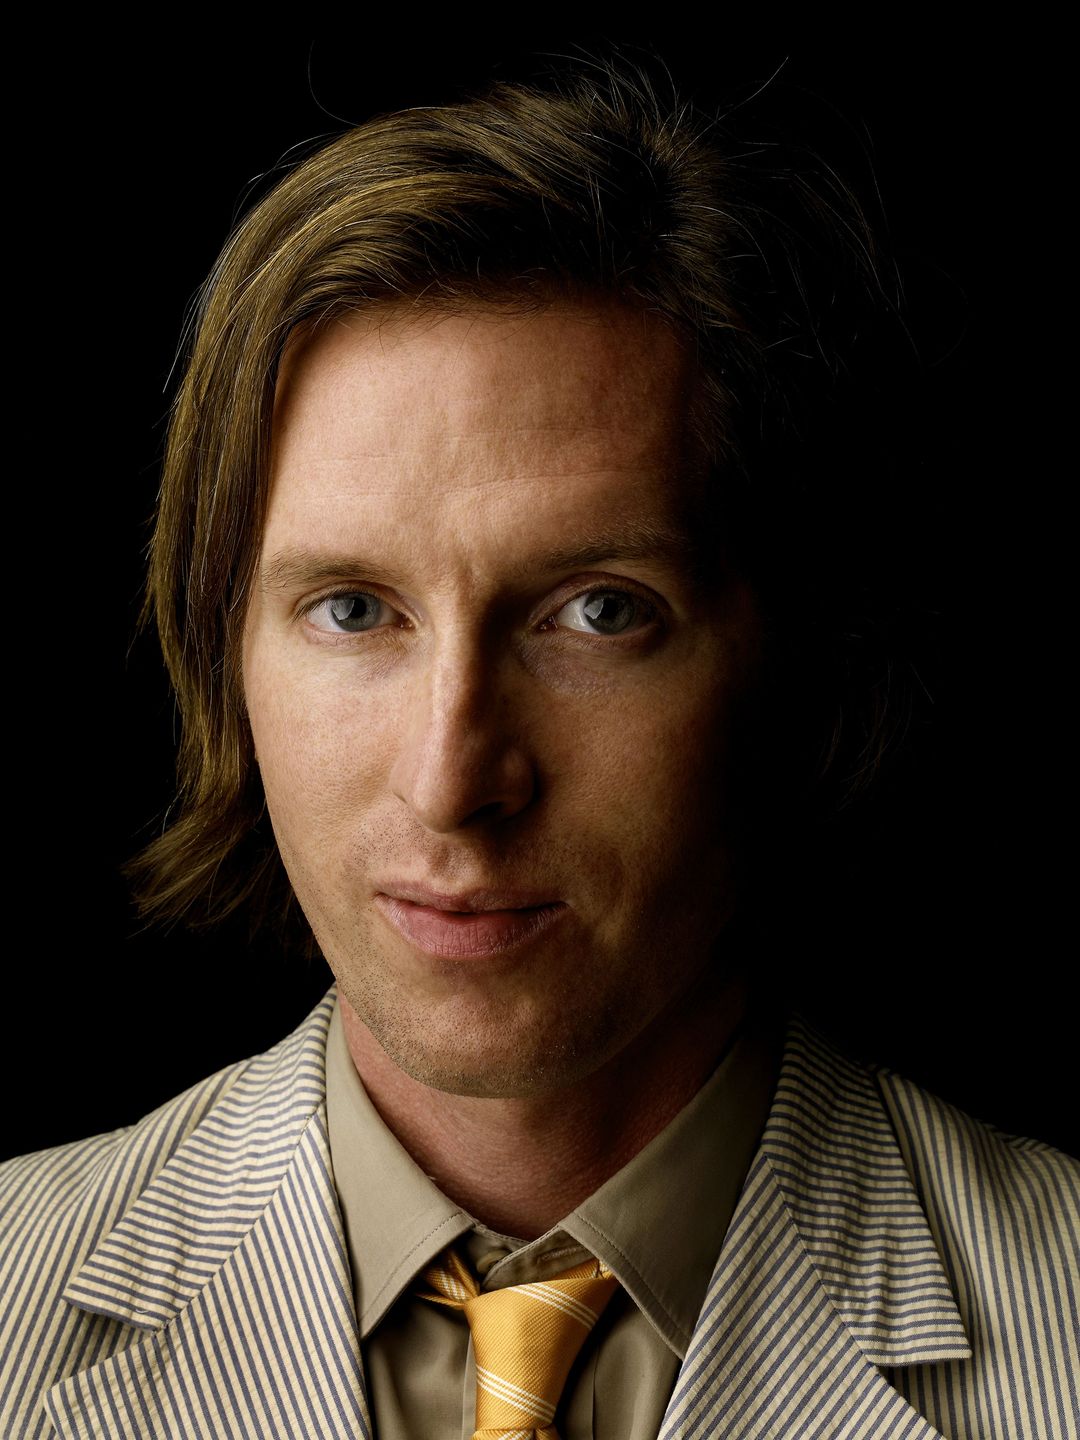 Wes Anderson how did he became famous